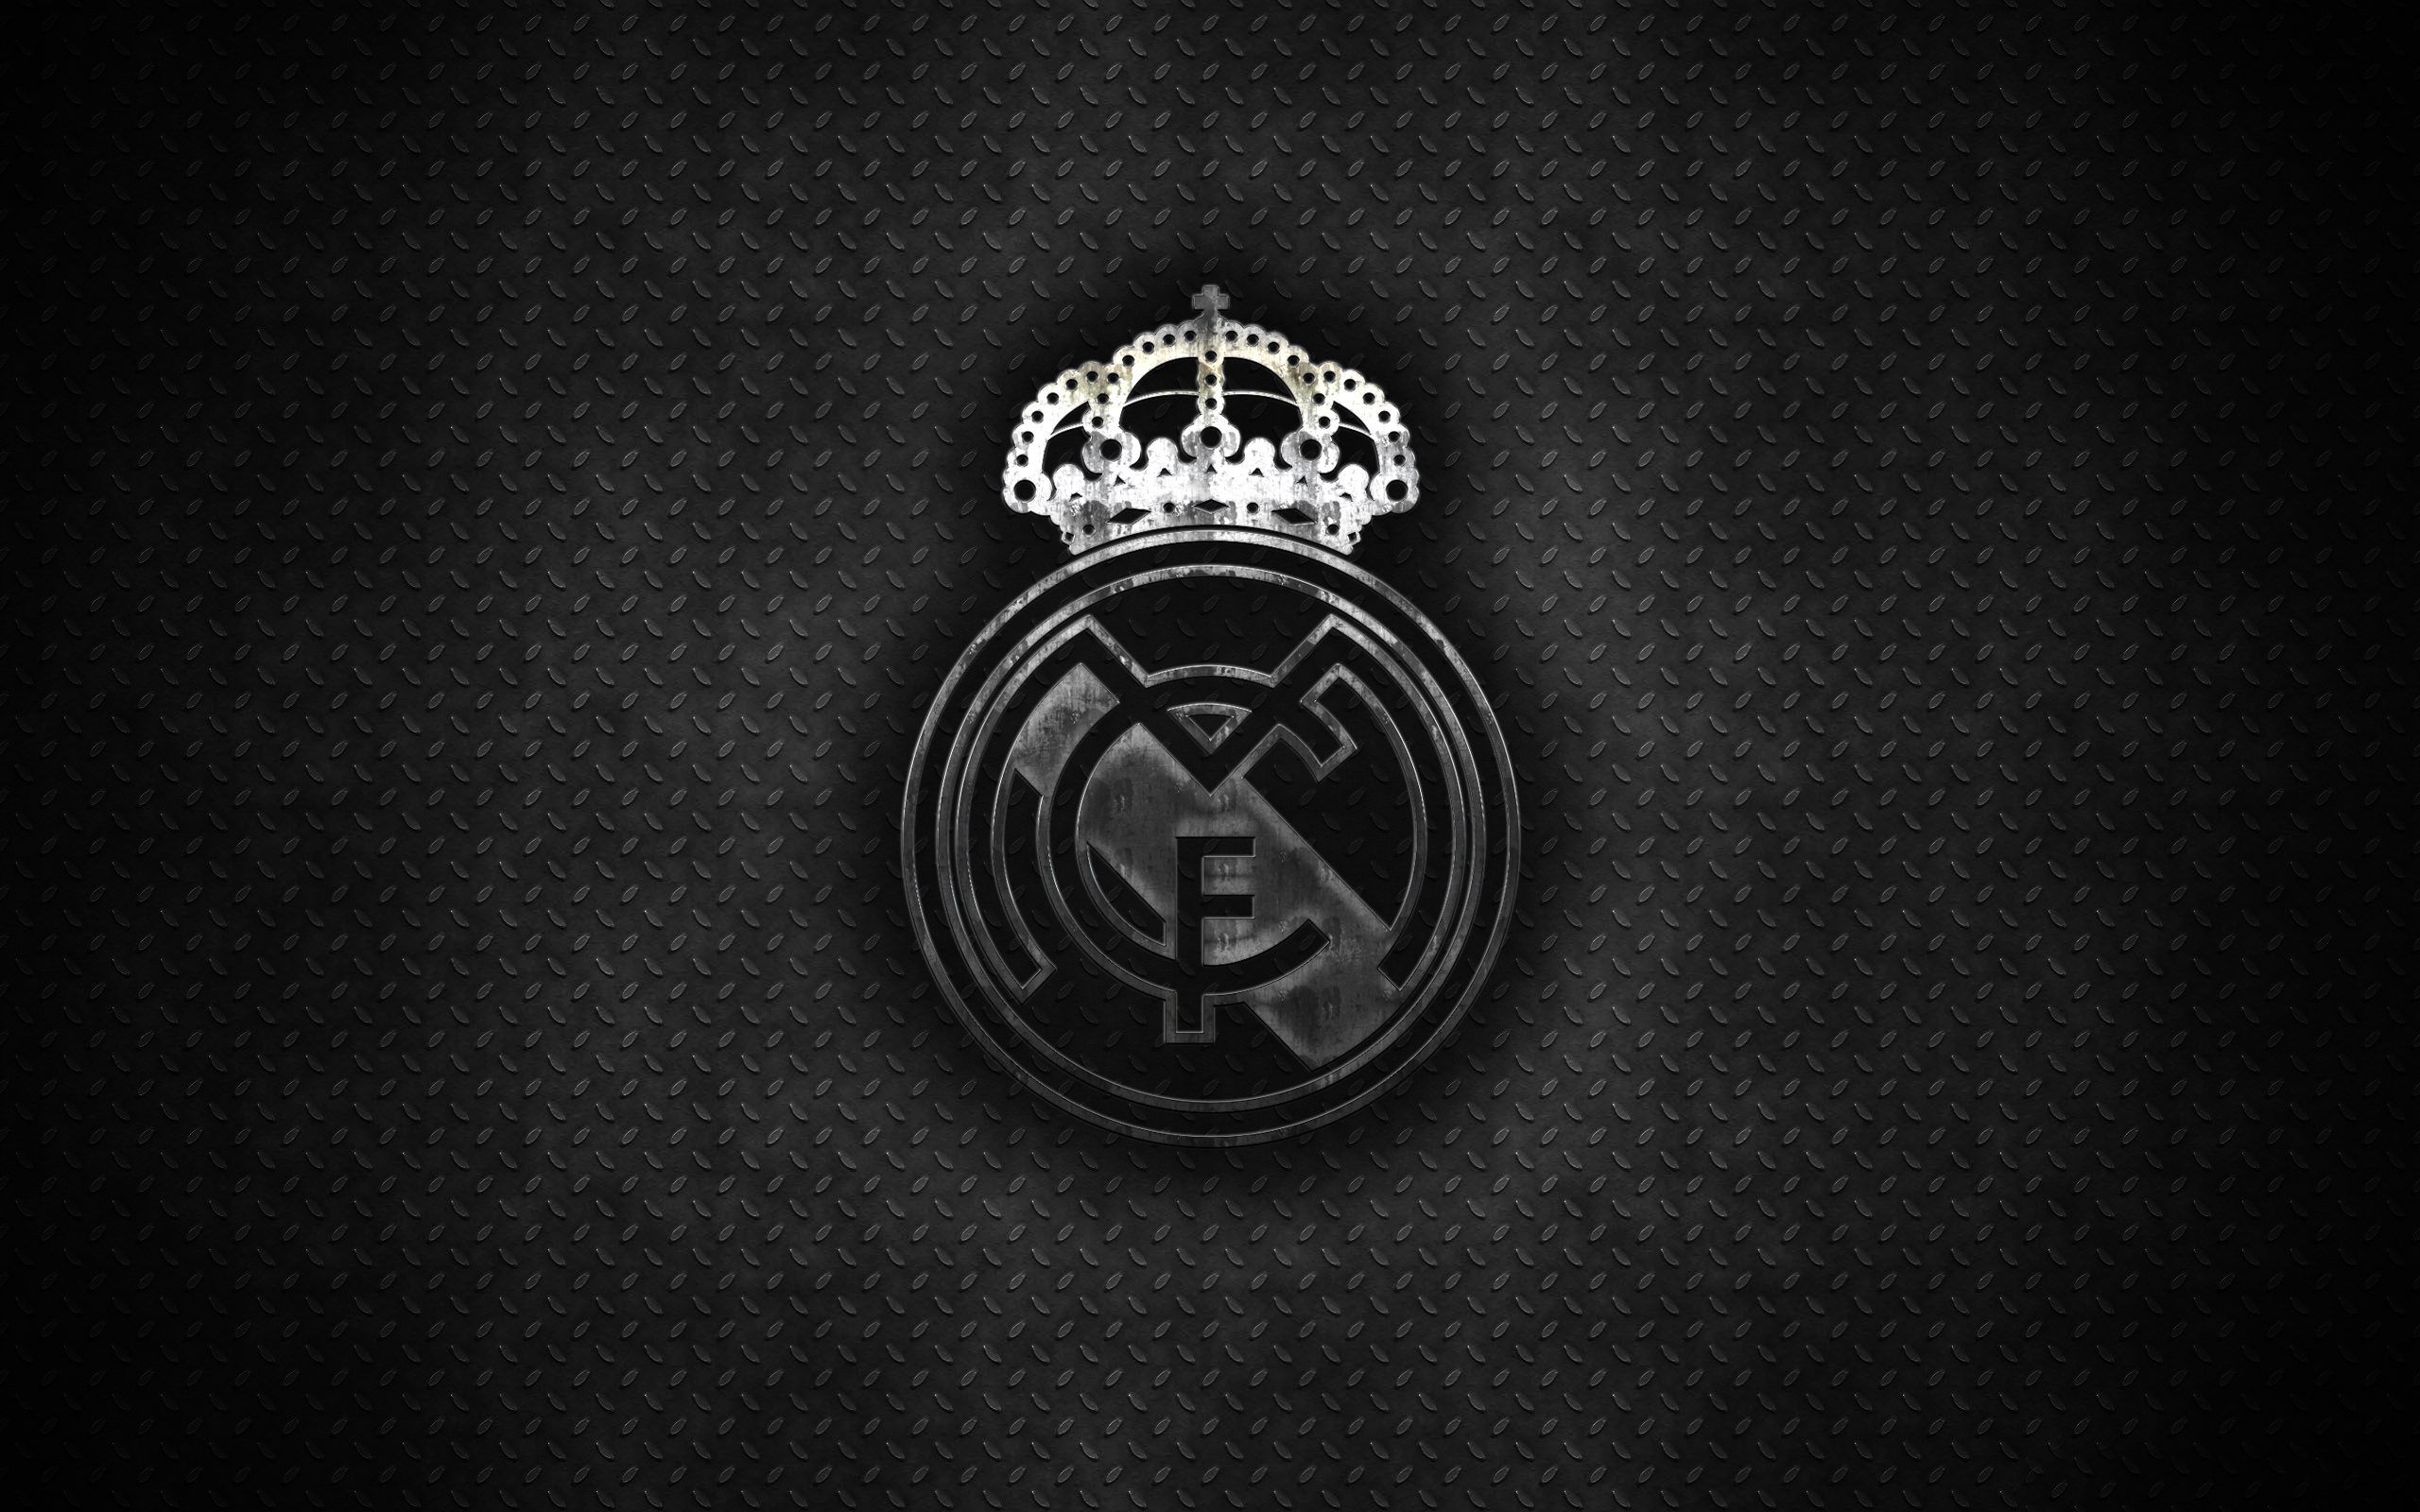 Real Madrid Logo wallpaper by Jefersonpp  Download on ZEDGE  4877